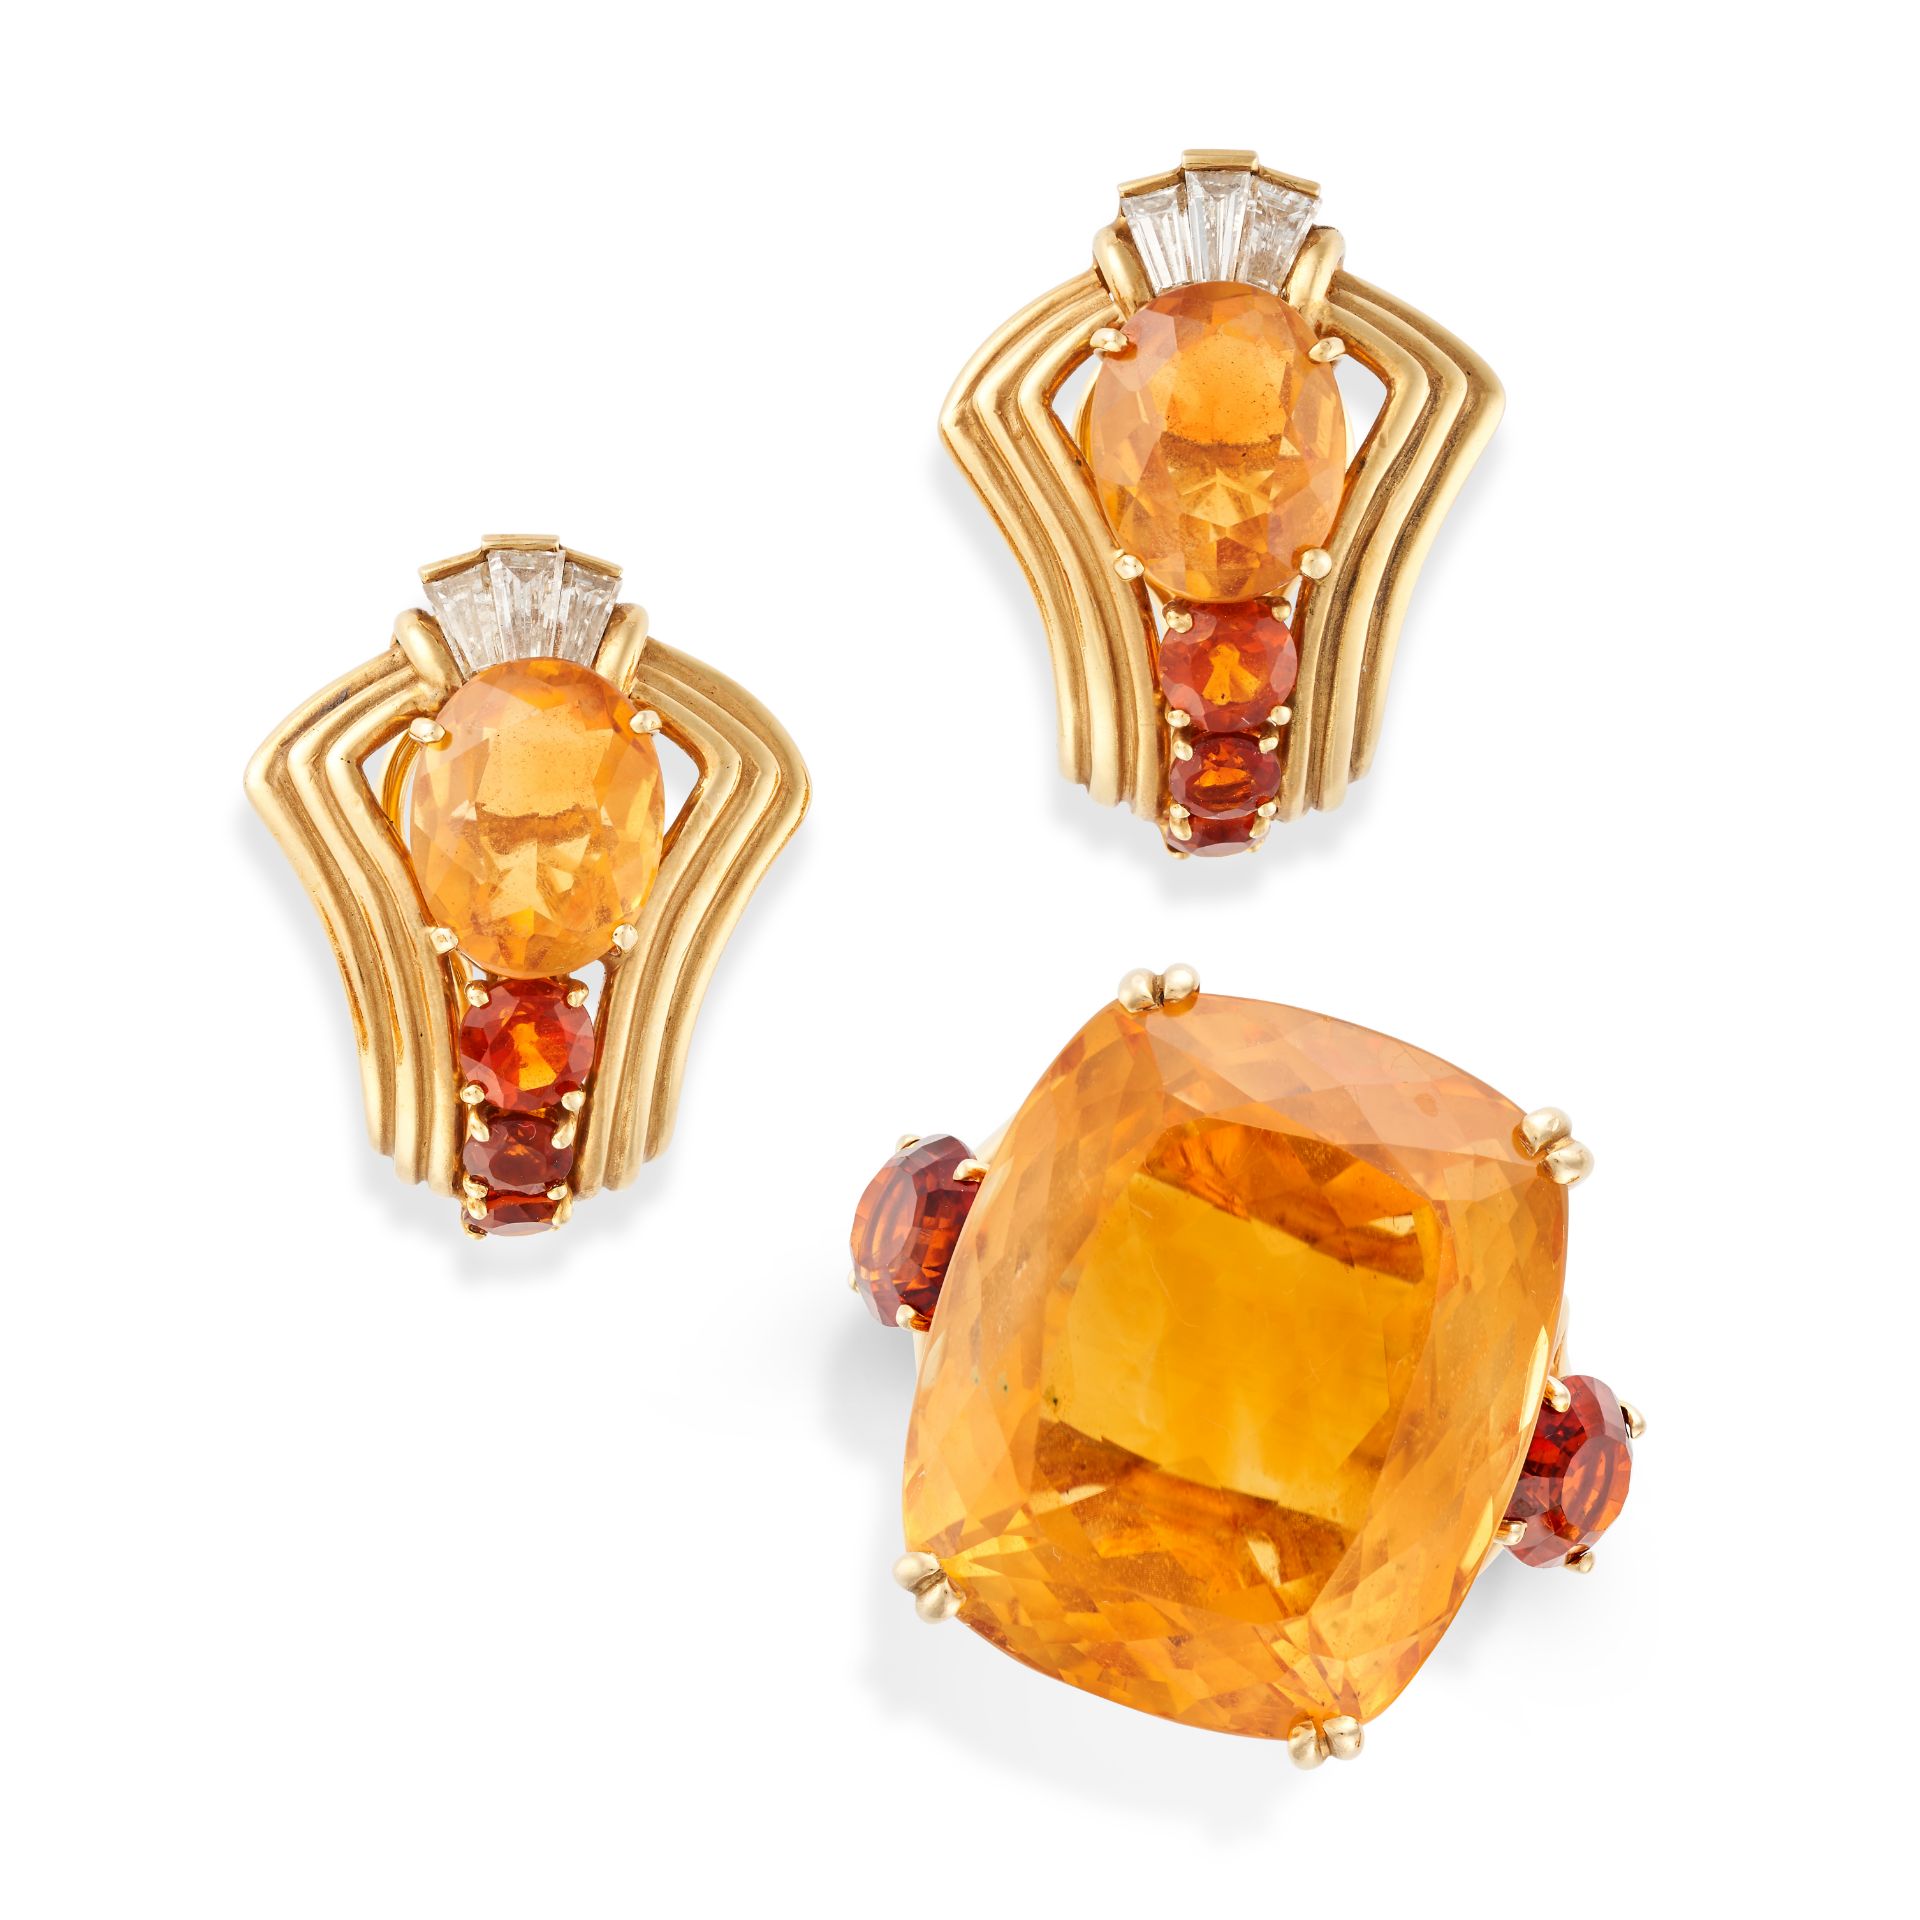 CHAUMET, A VINTAGE CITRINE AND DIAMOND RING AND EARRINGS SET in 18ct yellow gold, the earrings se...